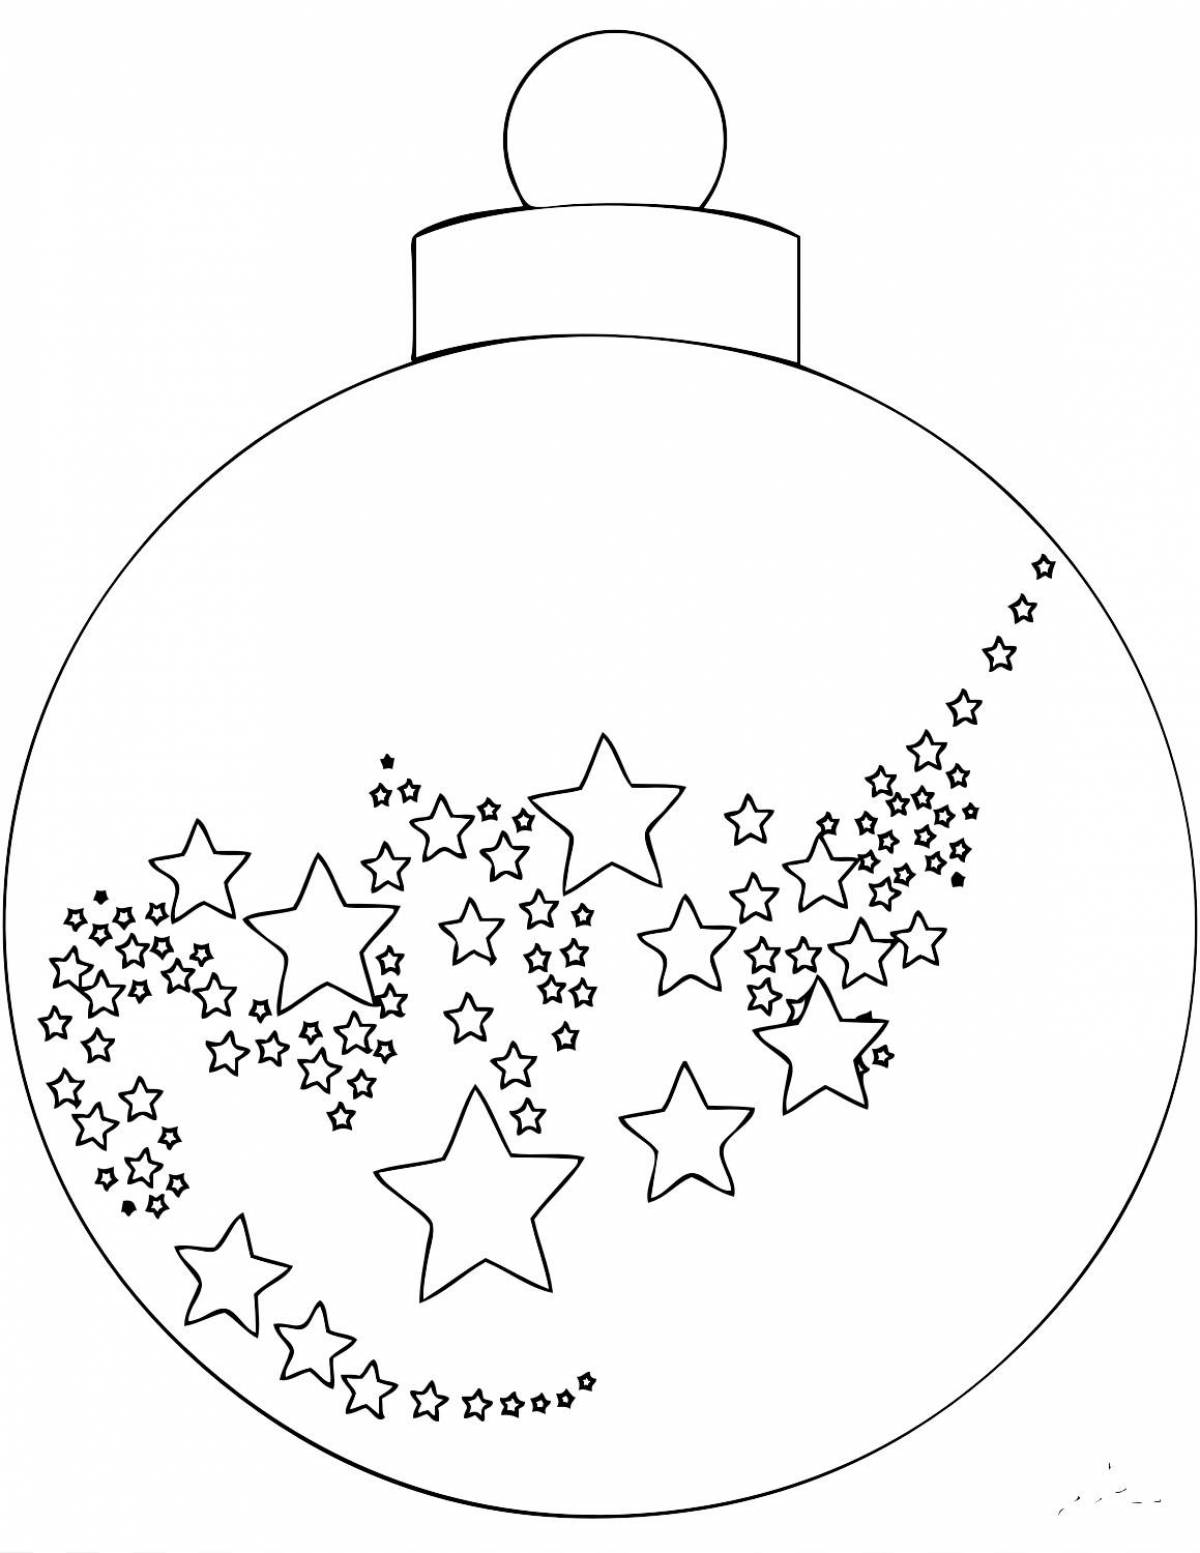 Gorgeous Christmas ball coloring book